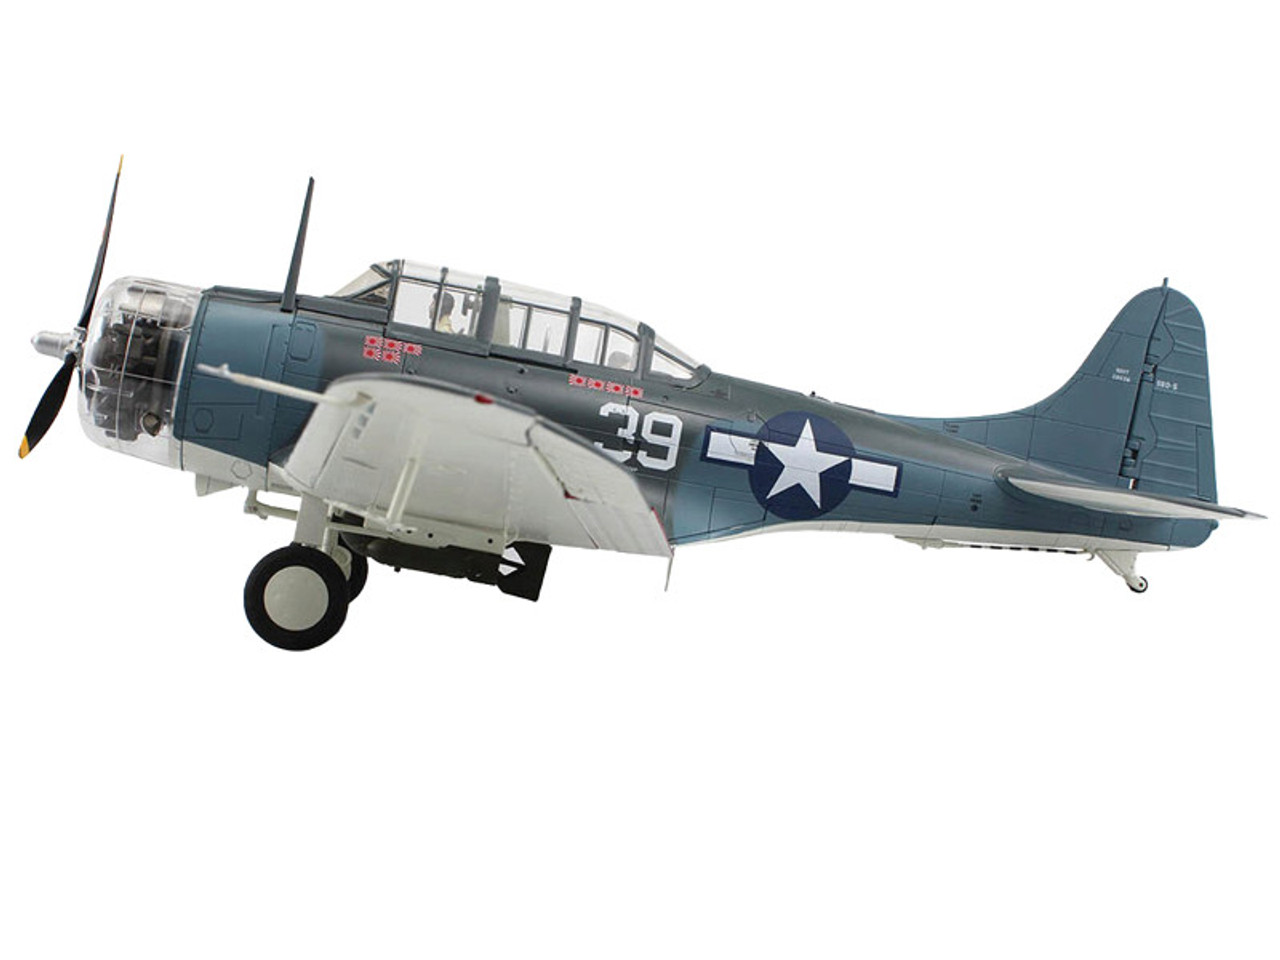 Douglas SBD-5 Dauntless Bomber Aircraft "Lt. Cook Cleland VB-16 USS Lexington Battle of the Philippine Seas" (1944) United States Navy "Premium Collection" 1/32 Diecast Model by Hobby Master